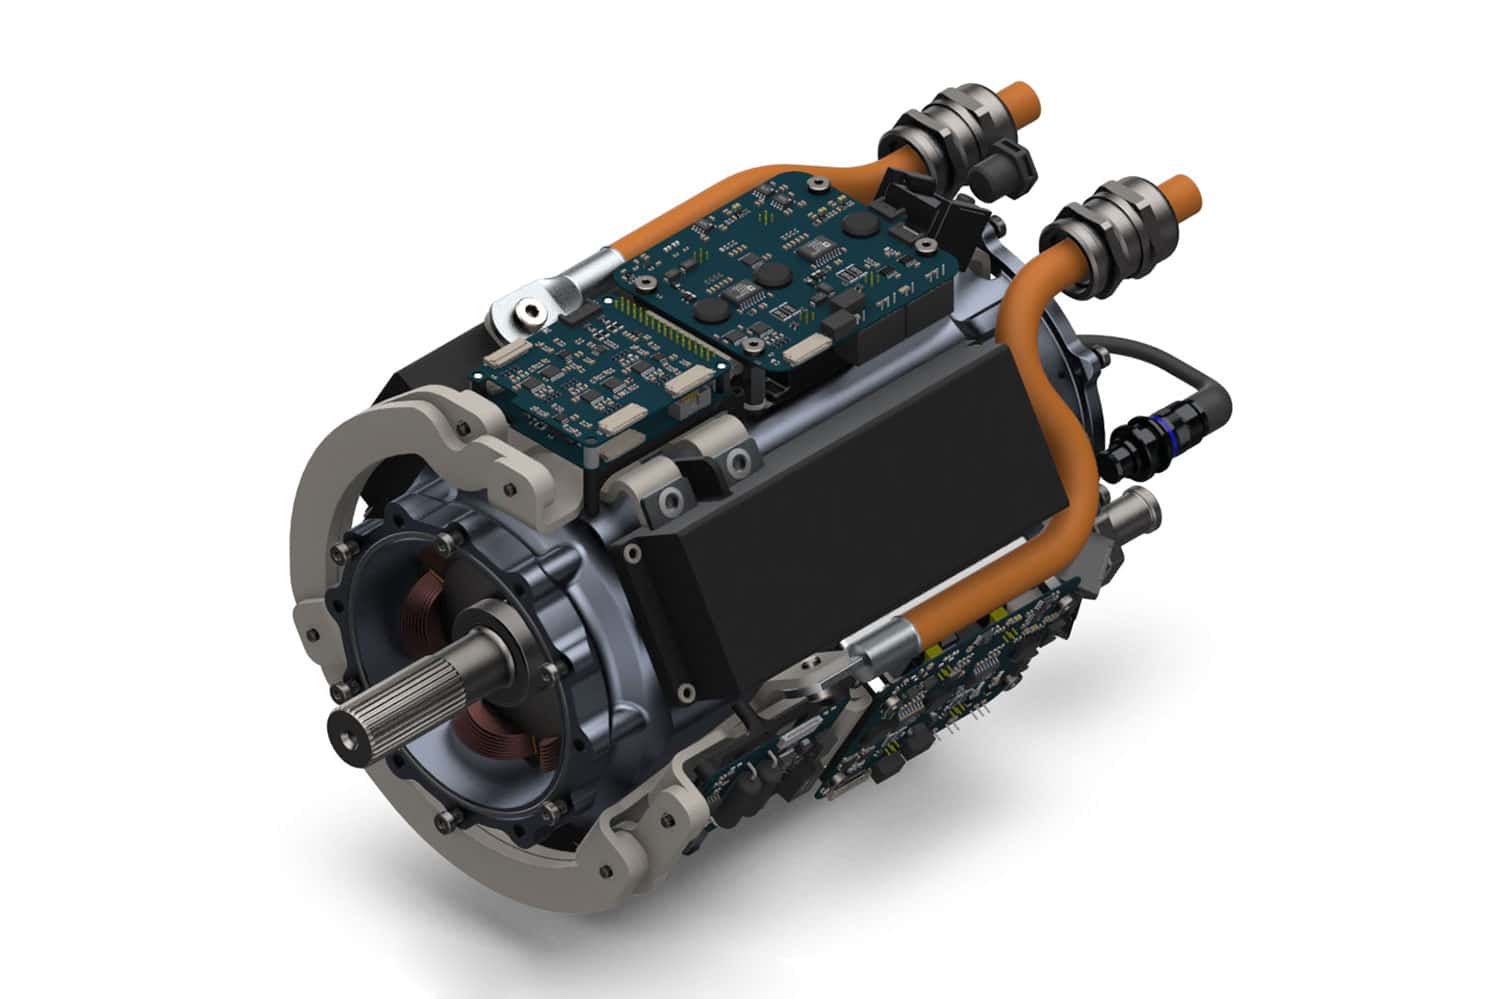 The HPDM-250 is an ultra-high power density integrated motor drive for electric aircraft.